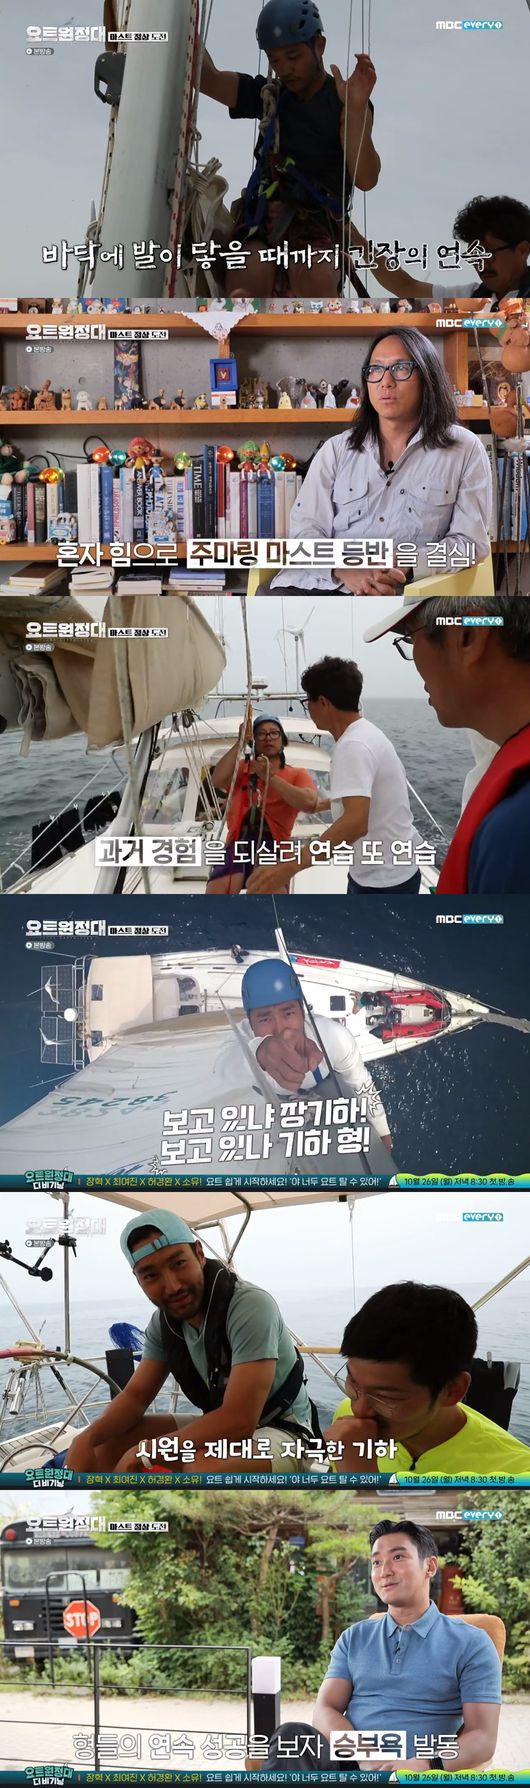 Jin Goo, Choi Siwon, Chang Kiha and Song Ho-joon climbed Mast as the last Top Model of the yacht trip.In MBC Everlon yacht Expedition broadcasted on the 19th, Jin Goo, Chang Kiha, Choi Siwon and Song Ho Joon climbed to Mast and recorded life shots.Captain Kim Seung-jin explained, I think the way to learn yacht is to hit the body. I will do Mast using climbing juma ring.First, Chang Kiha was the Top Model on the Mast climb.Chang Kiha said, I feel like jumping at the bungee. He slowly climbed up and was nervous and said, This is just a high-rise elevator.But Chang Kiha did not give up at the halfway point and climbed up to Mast.Jin Goo followed up with Top Model, who moved excitedly, unafraid, even in the high-rise Mast.Jin Goo said, I heard that it is a necessary course for yacht people to go up to Mast and take pictures.But I thought I would not want you to do it, he said. I did not have the fear of getting close to Yacht or getting close to the sea. Song Ho-joon decided to go up to the top model alone without the help of other members, and Song Ho-joon started to take a step up, taking advantage of his experience of jumaring in the past climbing.Choi Siwon then went on to climb Mast, too; Choi Siwon looked at the camera and laughed, shouting, Was you watching or Chang Kiha! You stimulated me?Choi Siwon said: I thought I only needed to go up the first floor.But Chang Kiha came up and said that he did it all. Jin Goo also went to the second floor and I once again Top Model.The crew gave Choi Siwon a laugh by scaring him Im not good with strings.But Choi Siwon once again shouted Watch or Chang Kiha and made the surroundings into a laughing sea.Choi Siwon then shouted, Is it as cool as the Jin Goo type? The crew laughed, saying, You are the first.Choi Siwon recorded life shots on top of Mast: MBC Everlon yacht Expedition broadcast capture